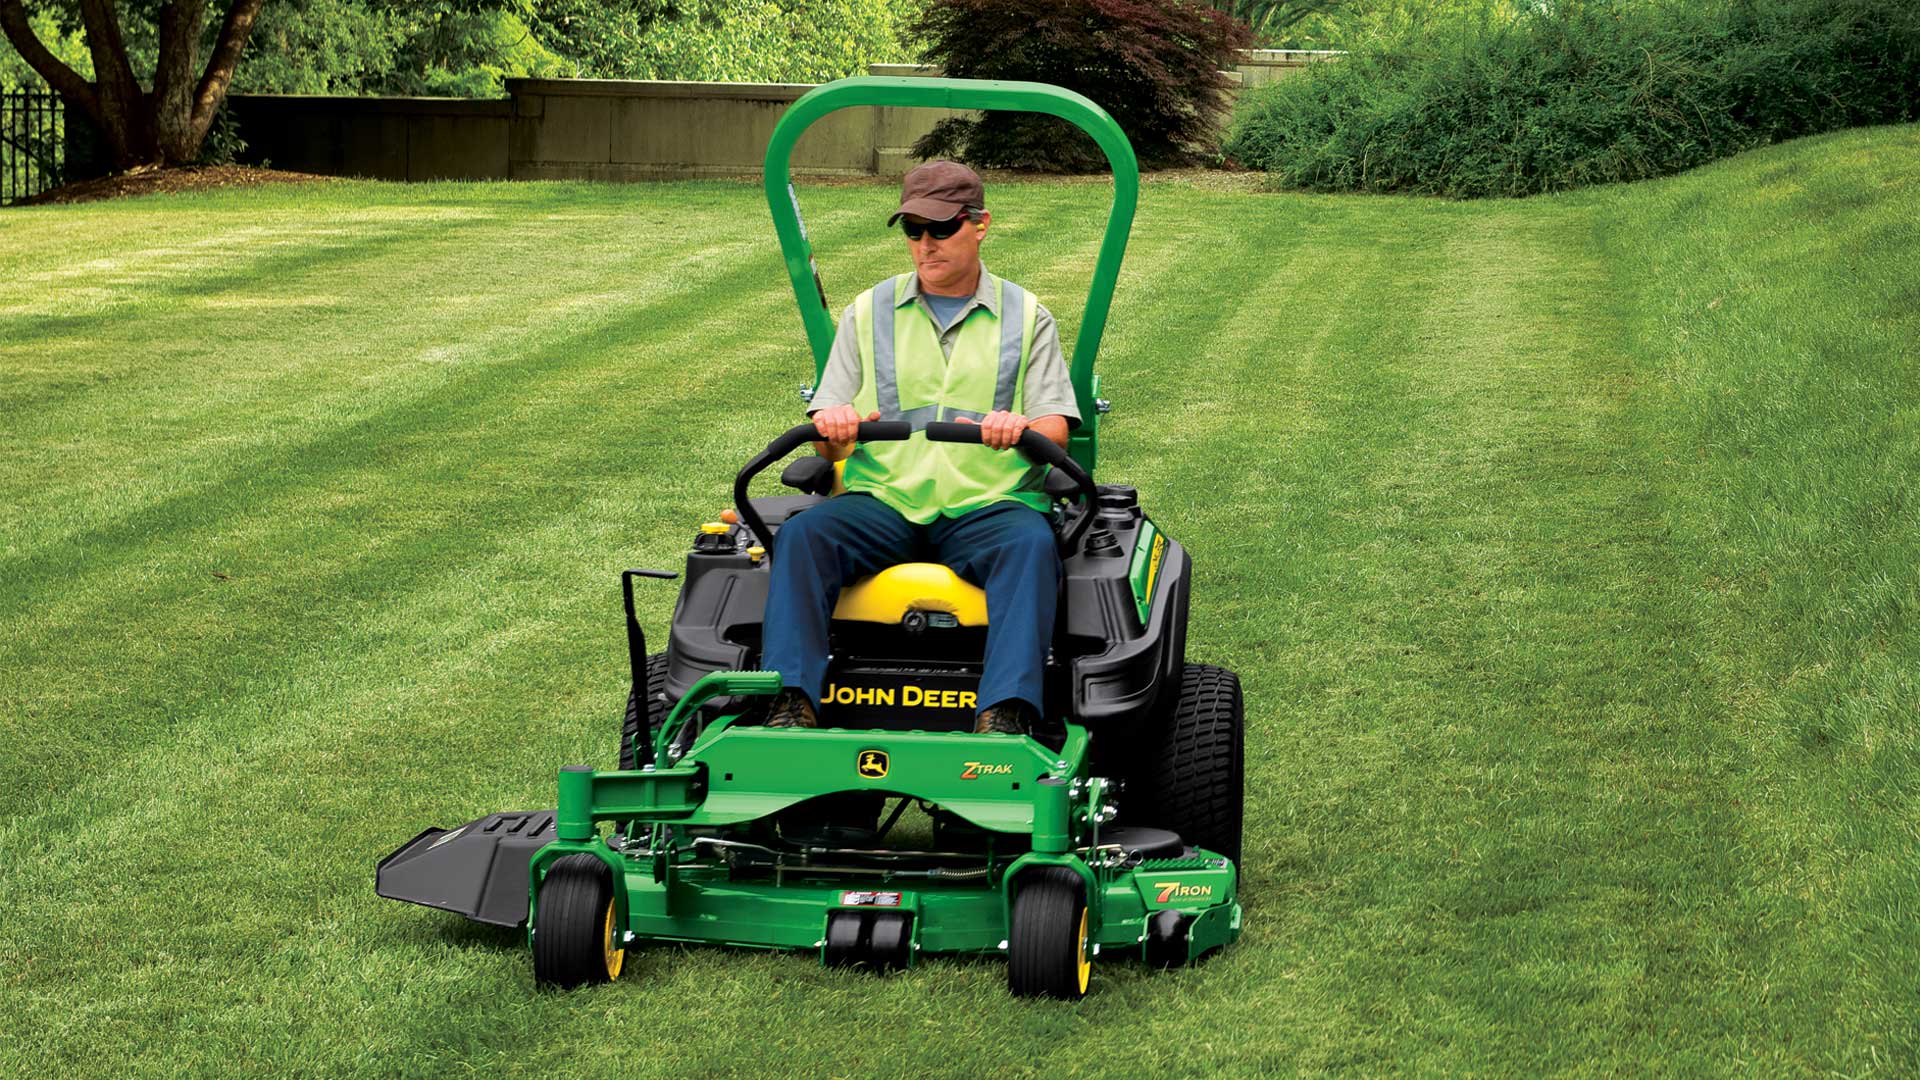 Commercial lawn mower used for landscaping & precision grass cutting